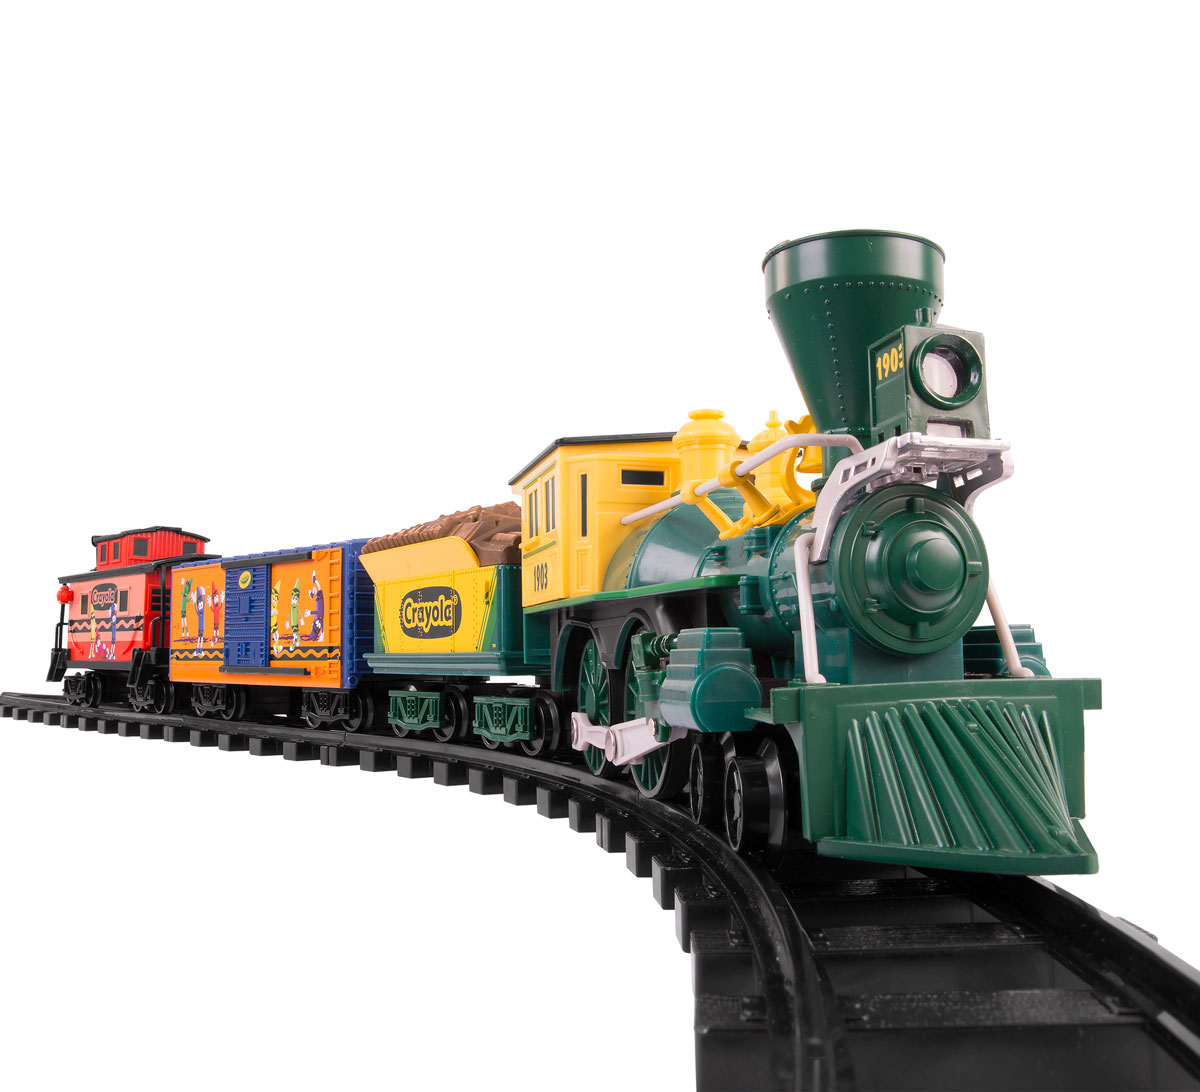 Details about   Lionel 7-11552 Crayola Gondola G gauge Compatible with Lionel battery-operated 